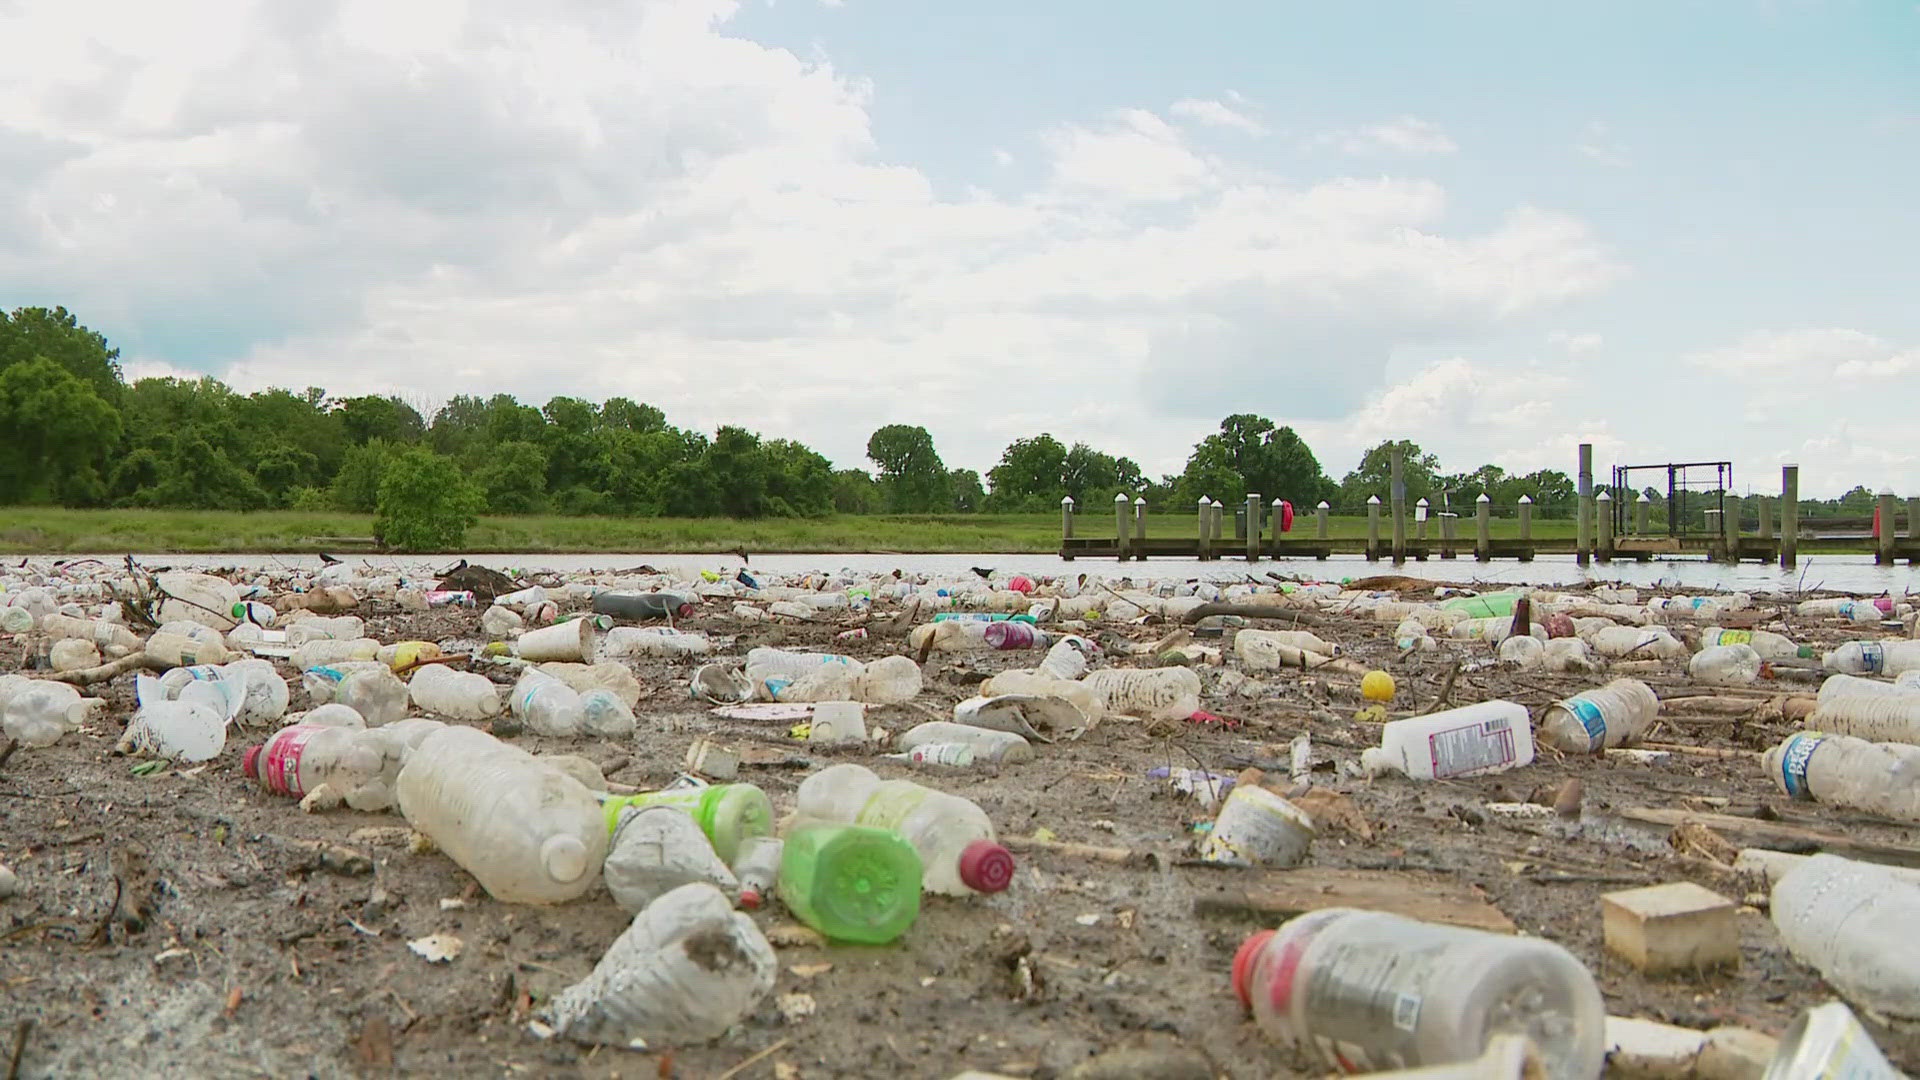 IT HAPPENS EVERY SUMMER -- BUT "ANACOSTIA'S RIVER KEEPER" SAYS IT DOESN'T HAVE TO BE THIS WAY.